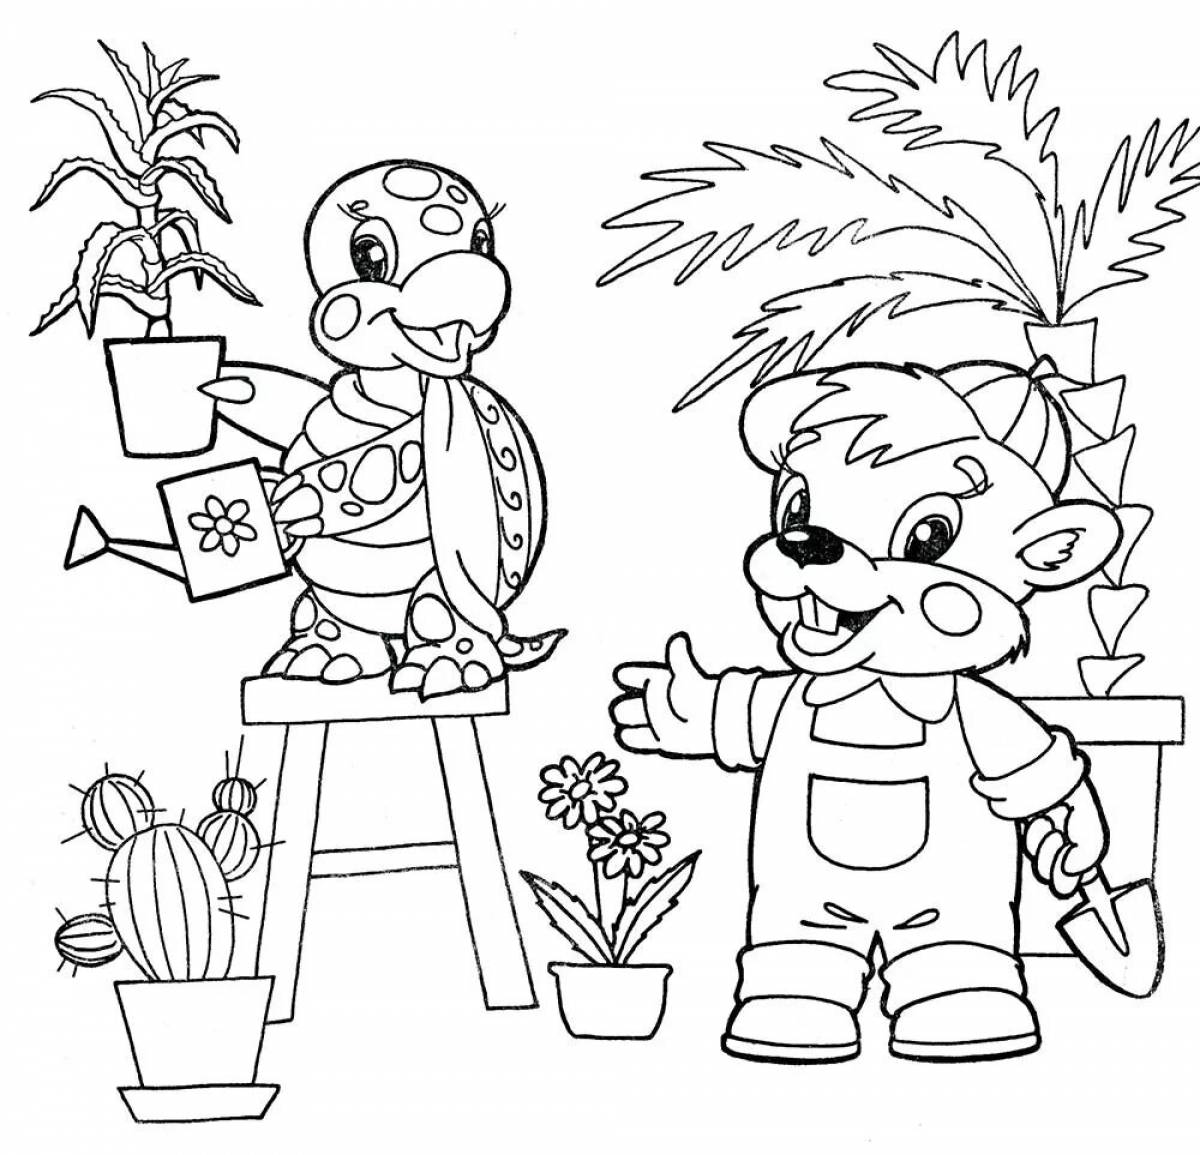 Stylish houseplant coloring book for preschoolers